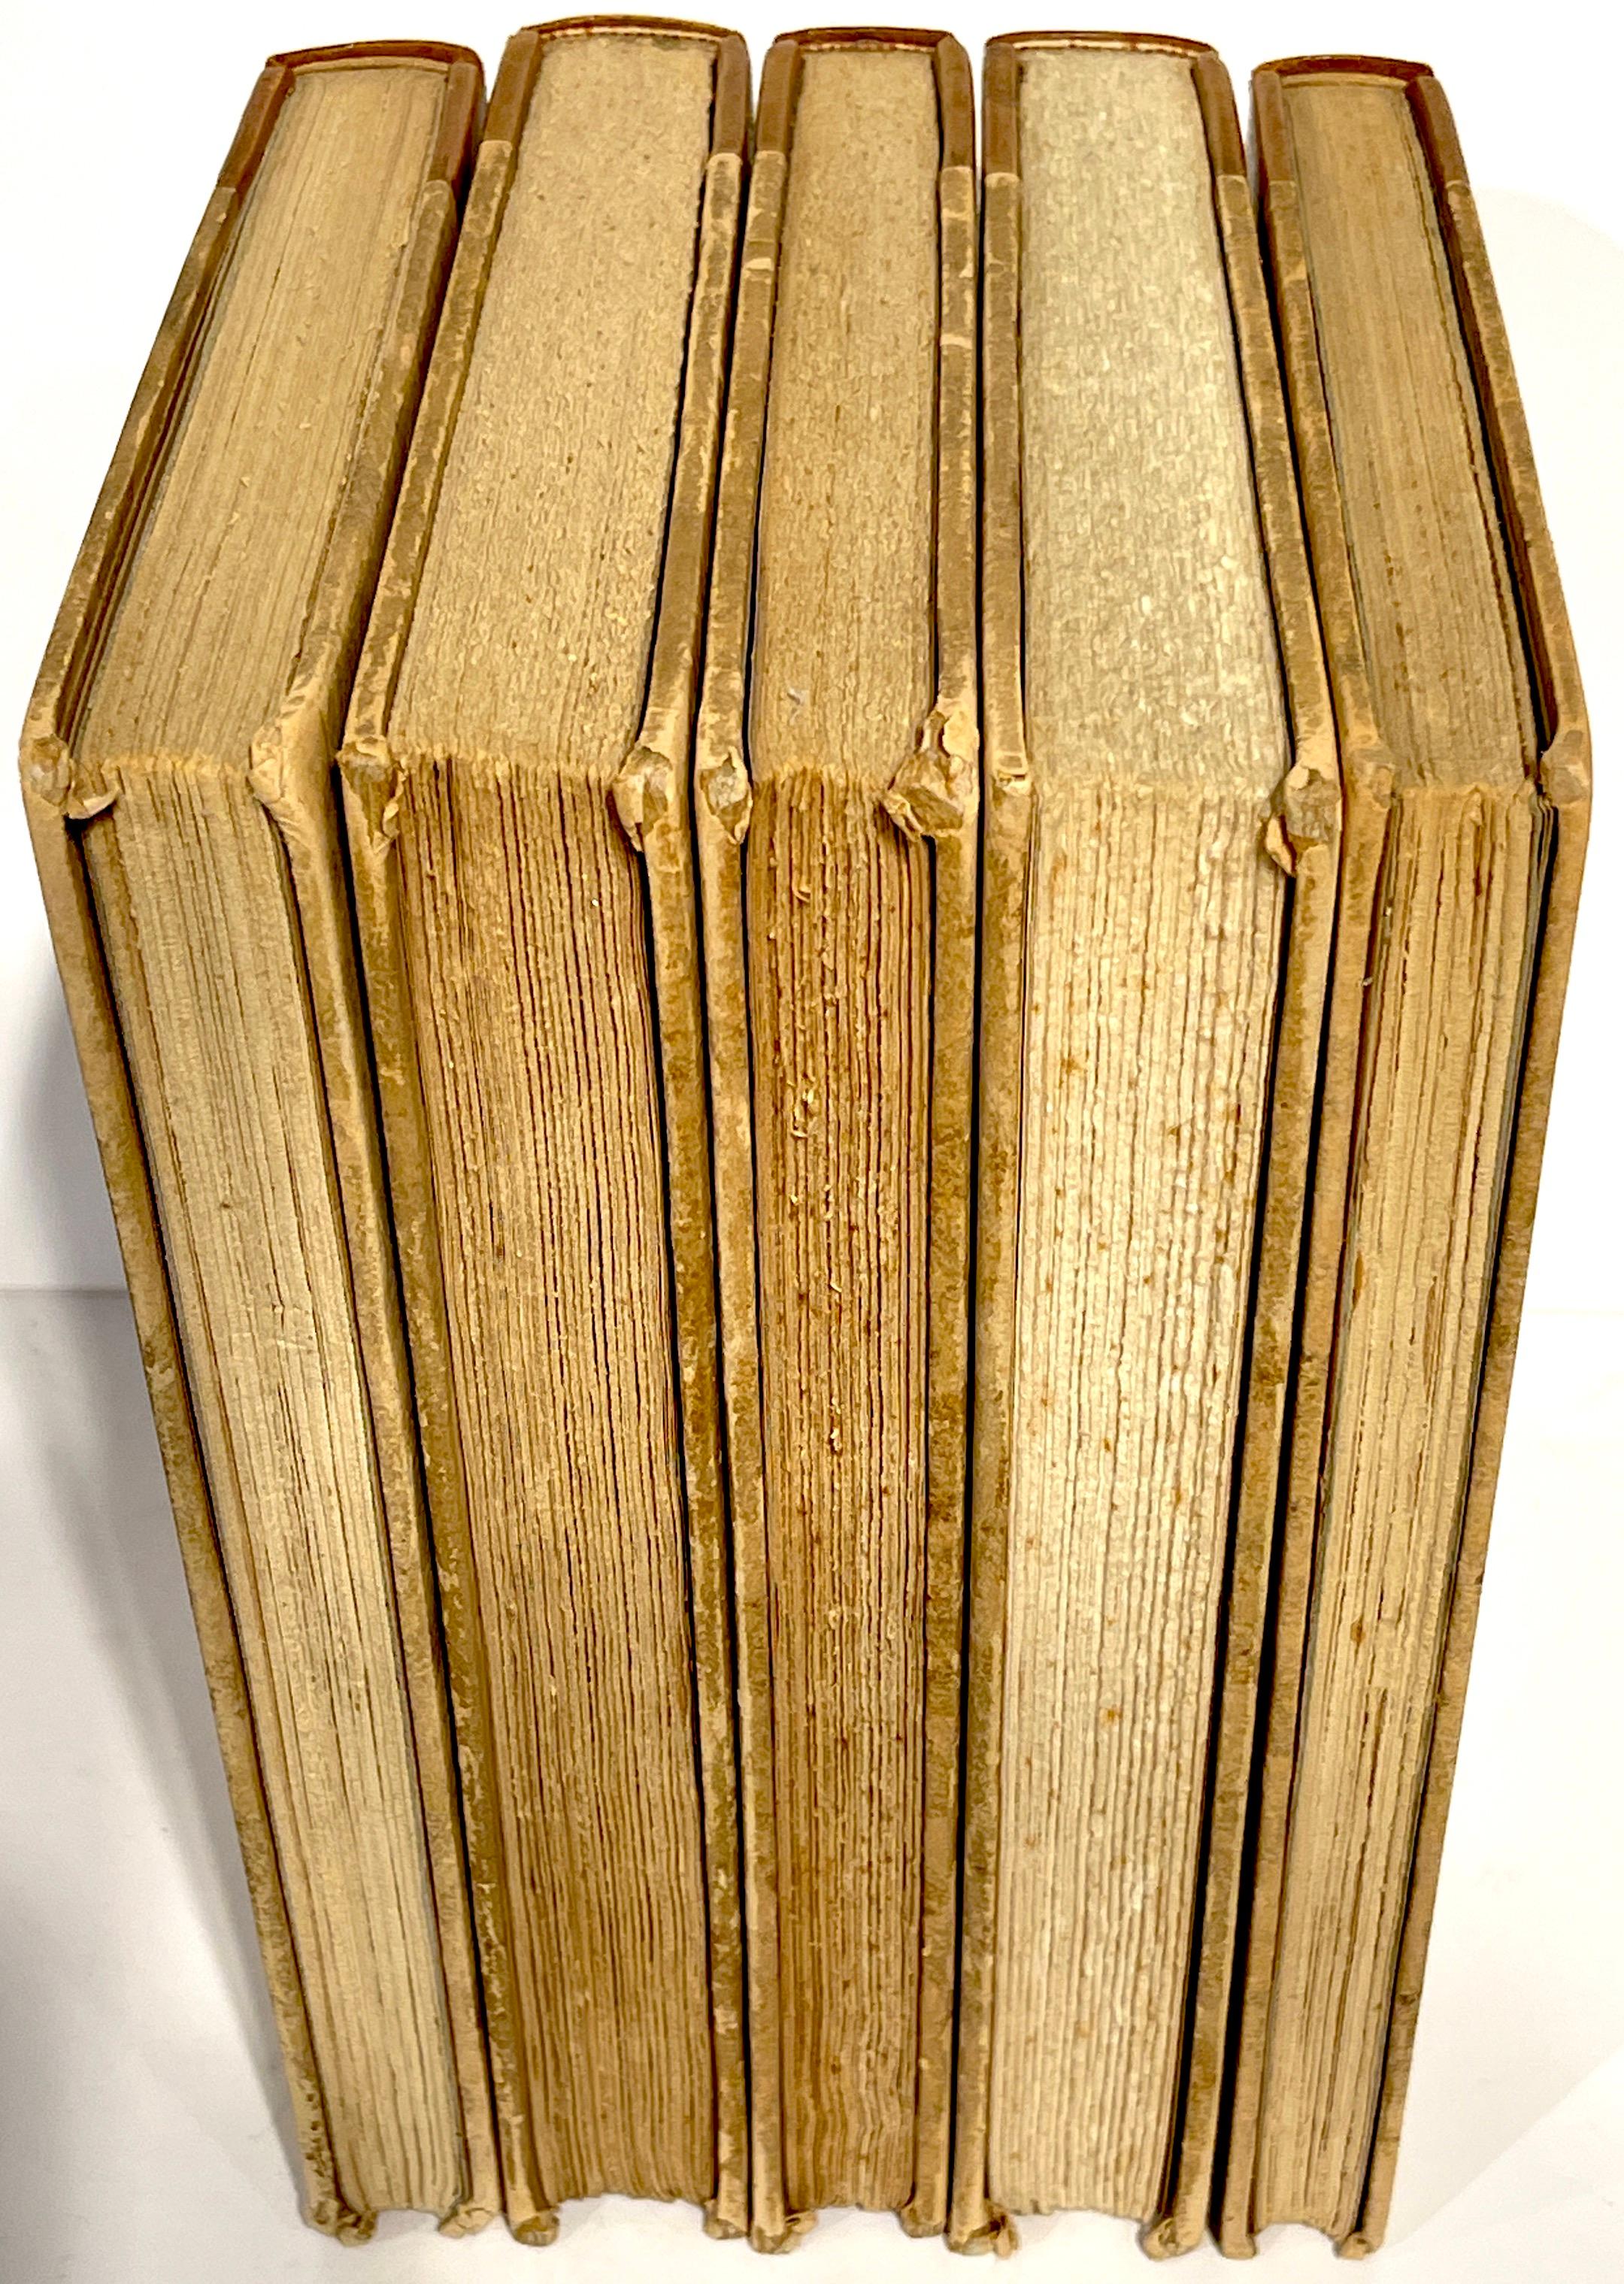 5 Antique Saddle Leather & Gilt Steel Grey Bound Gilt Theatrical Books in Greek For Sale 7